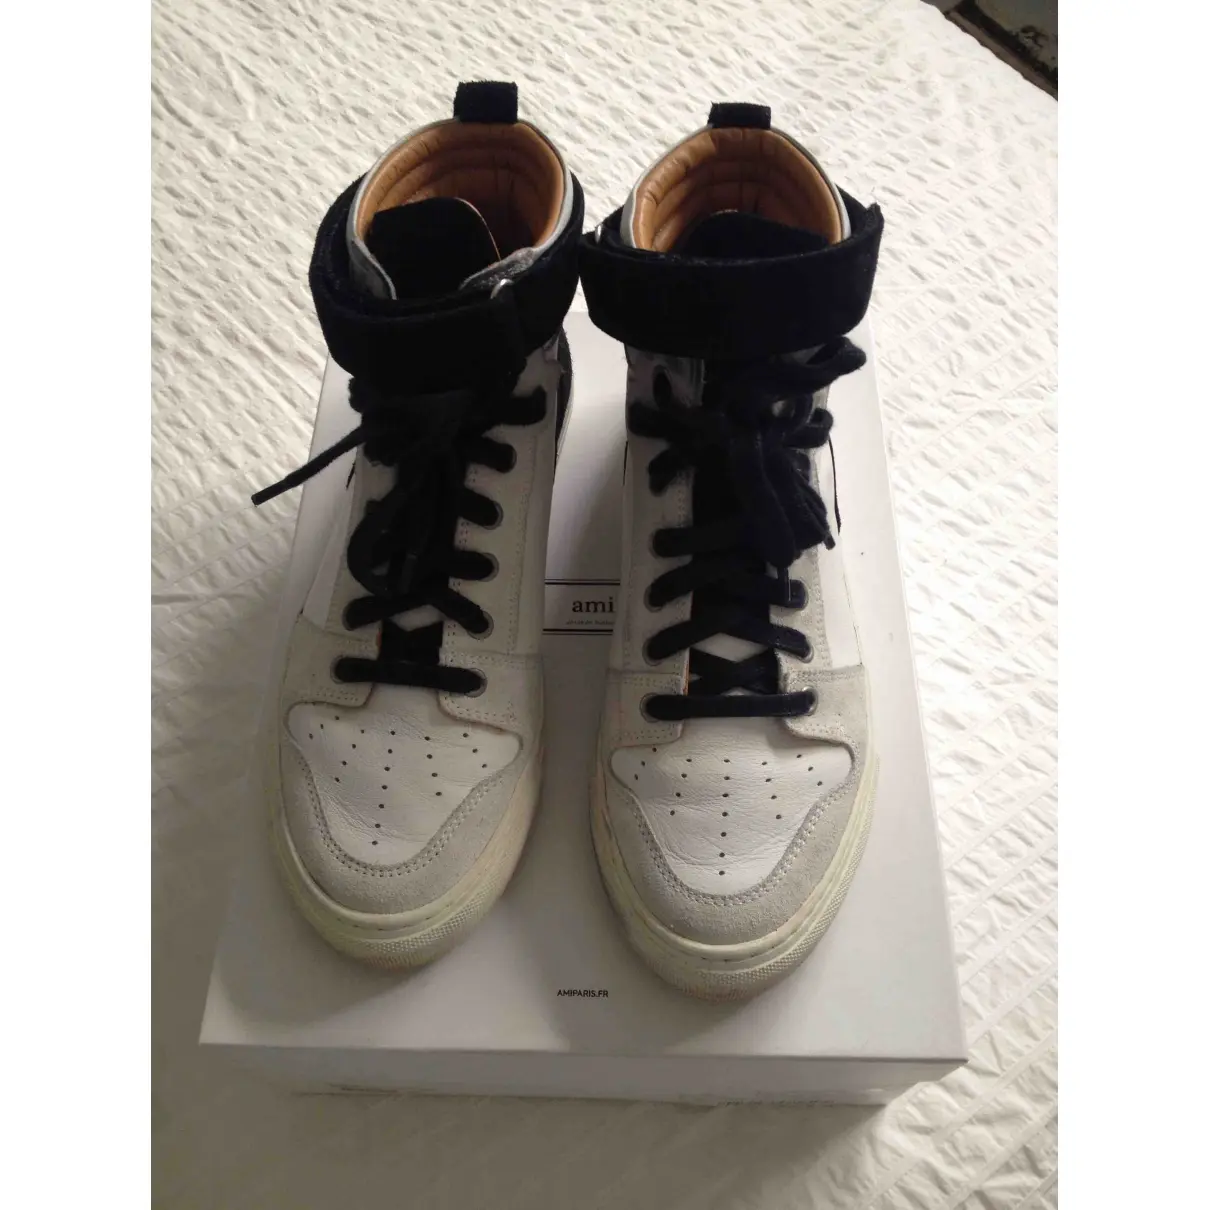 Ami Leather high trainers for sale